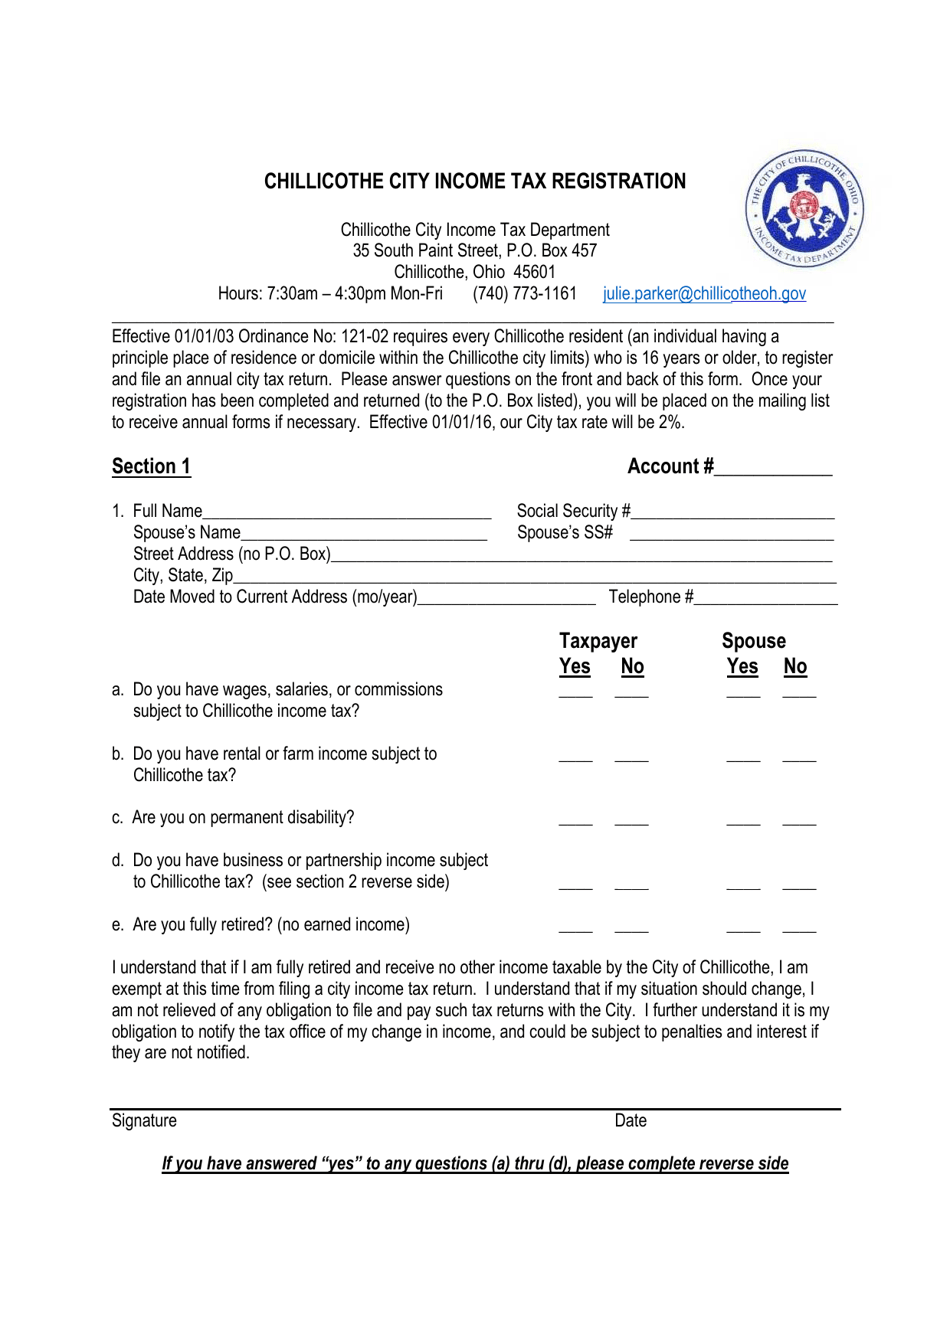 Income Tax Registration - City of Chillicothe, Ohio, Page 1